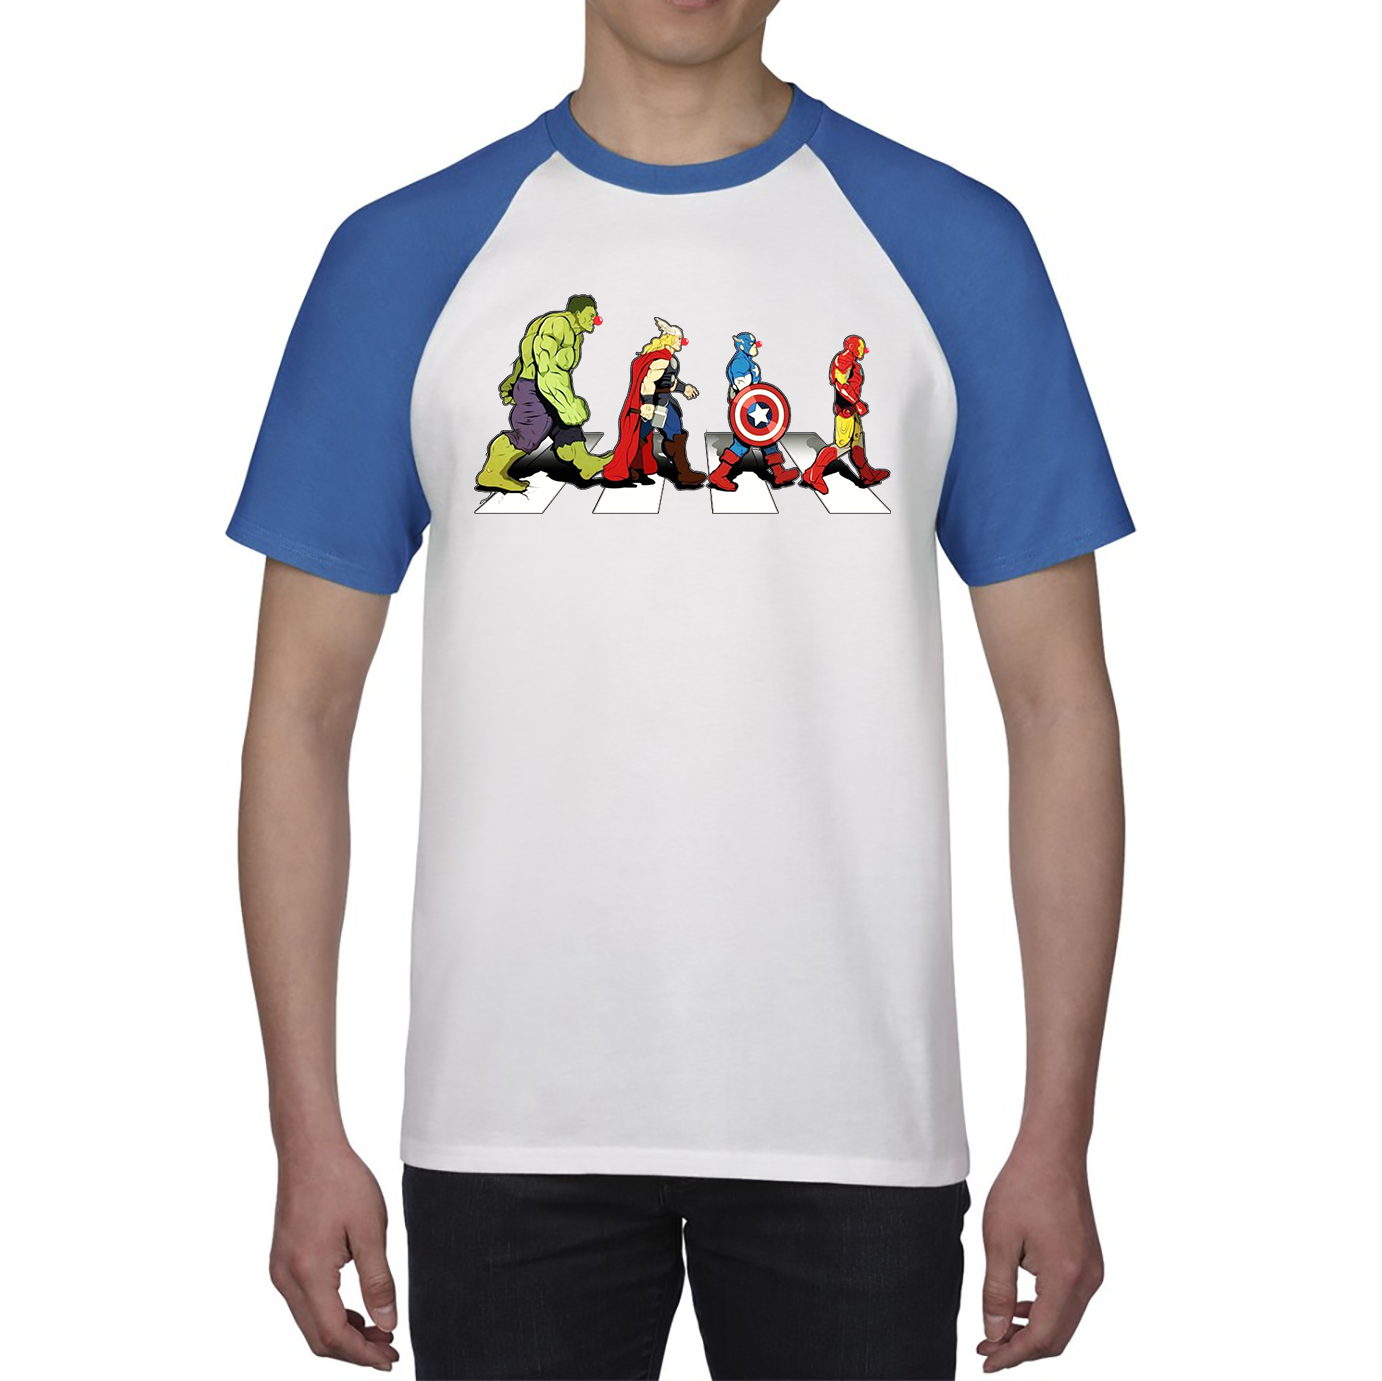 Hulk Thor Captain America Iron Man Marvel Avengers Abbey Road Red Nose Day Baseball T Shirt. 50% Goes To Charity